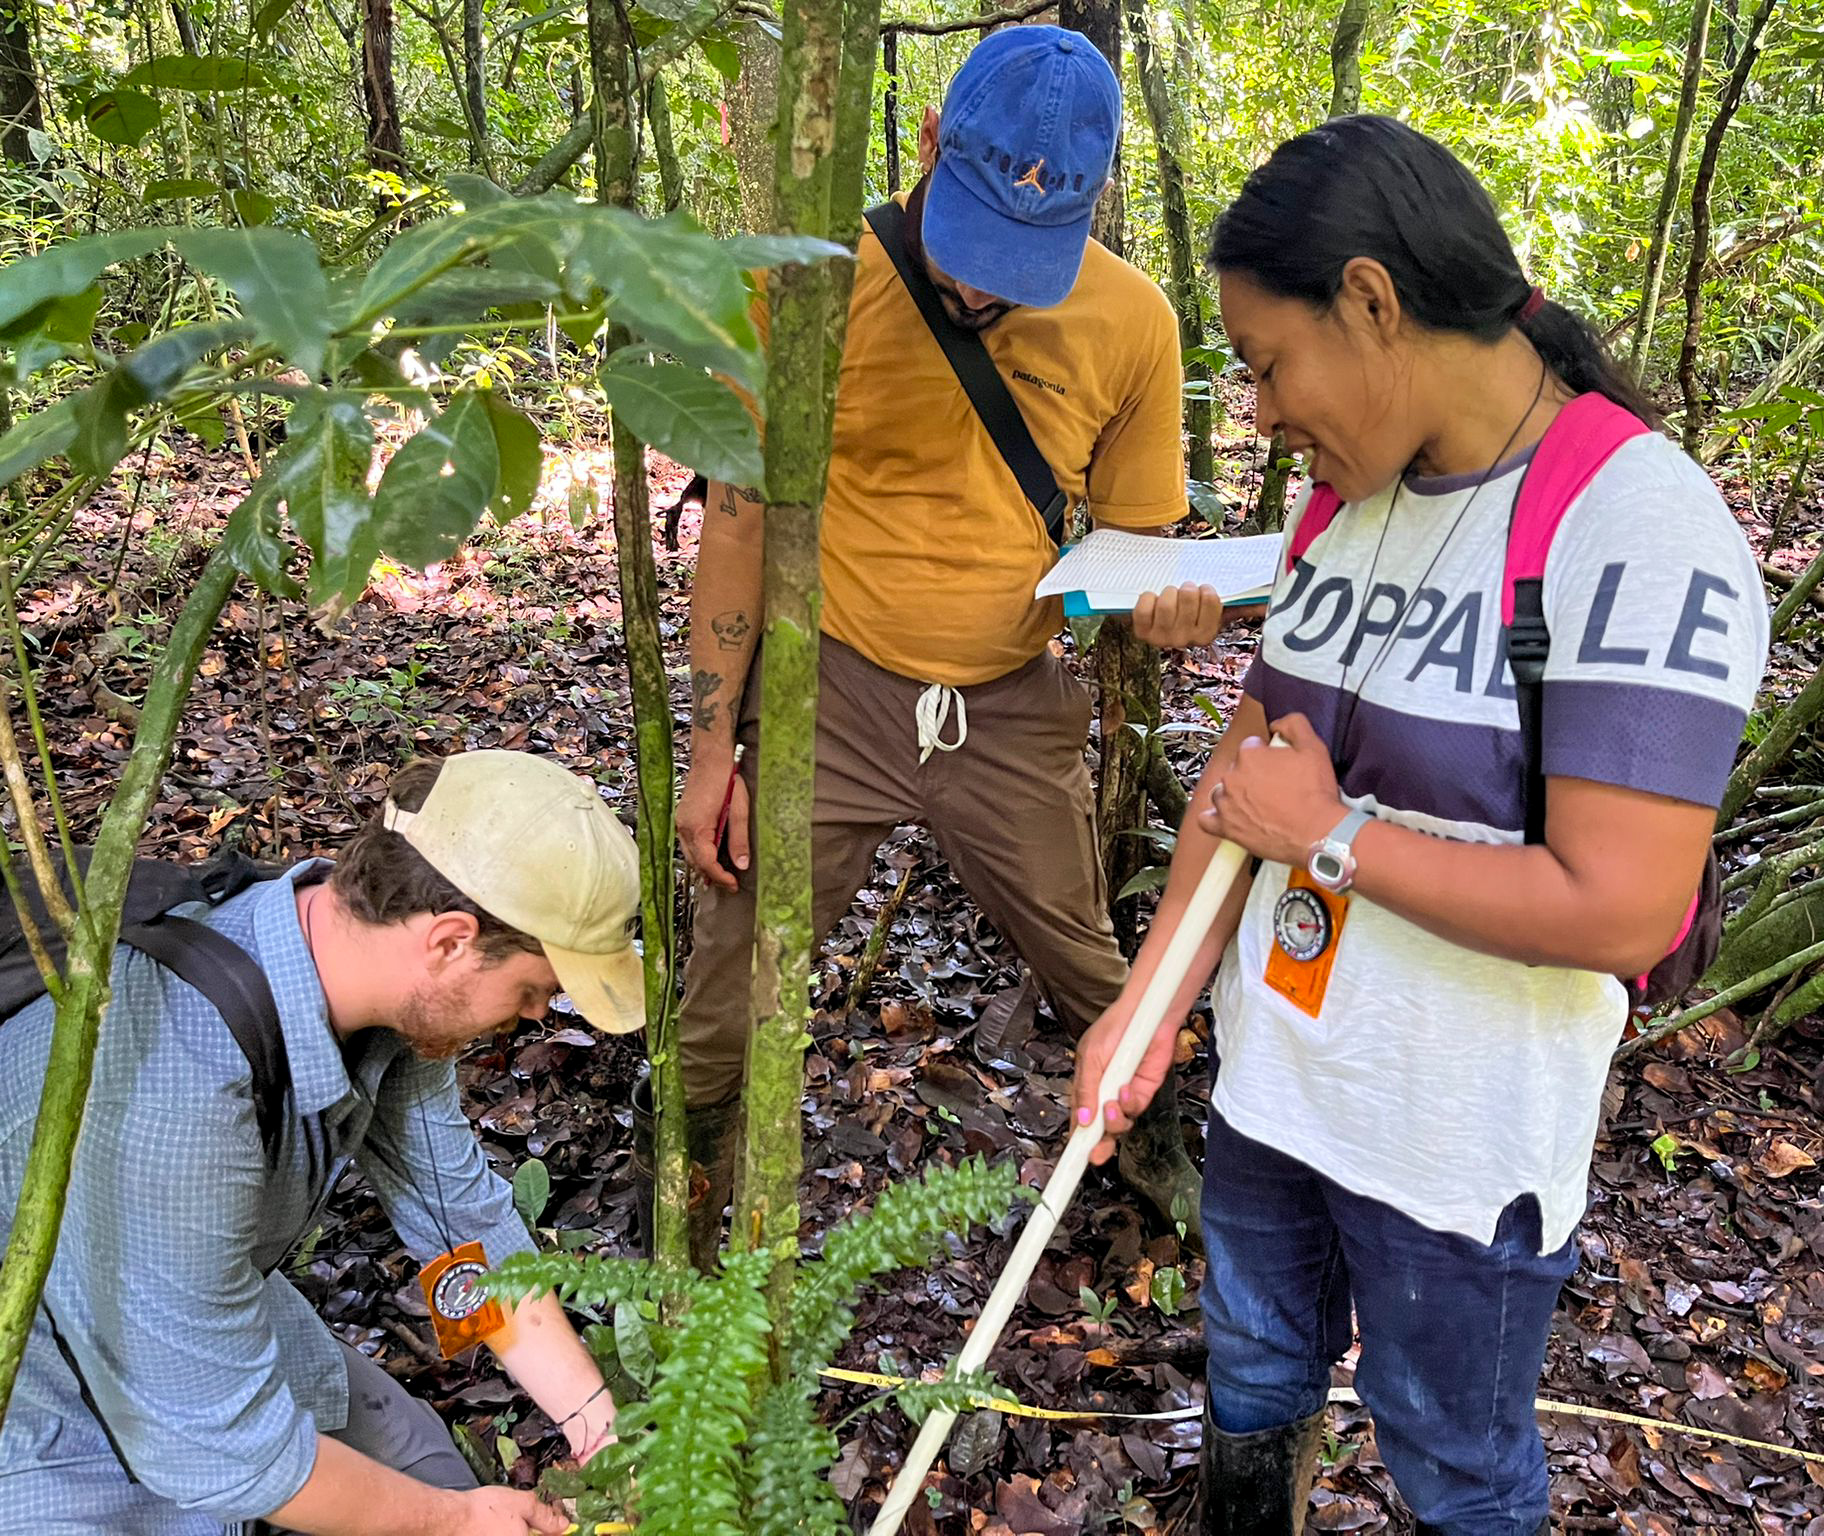 Gabriel Dally, an undergraduate student at Marquette university, Antimo Perez, and Delisa Membache, a project assistant, measure the location of certain trees and vines on Barro Colorado Island.